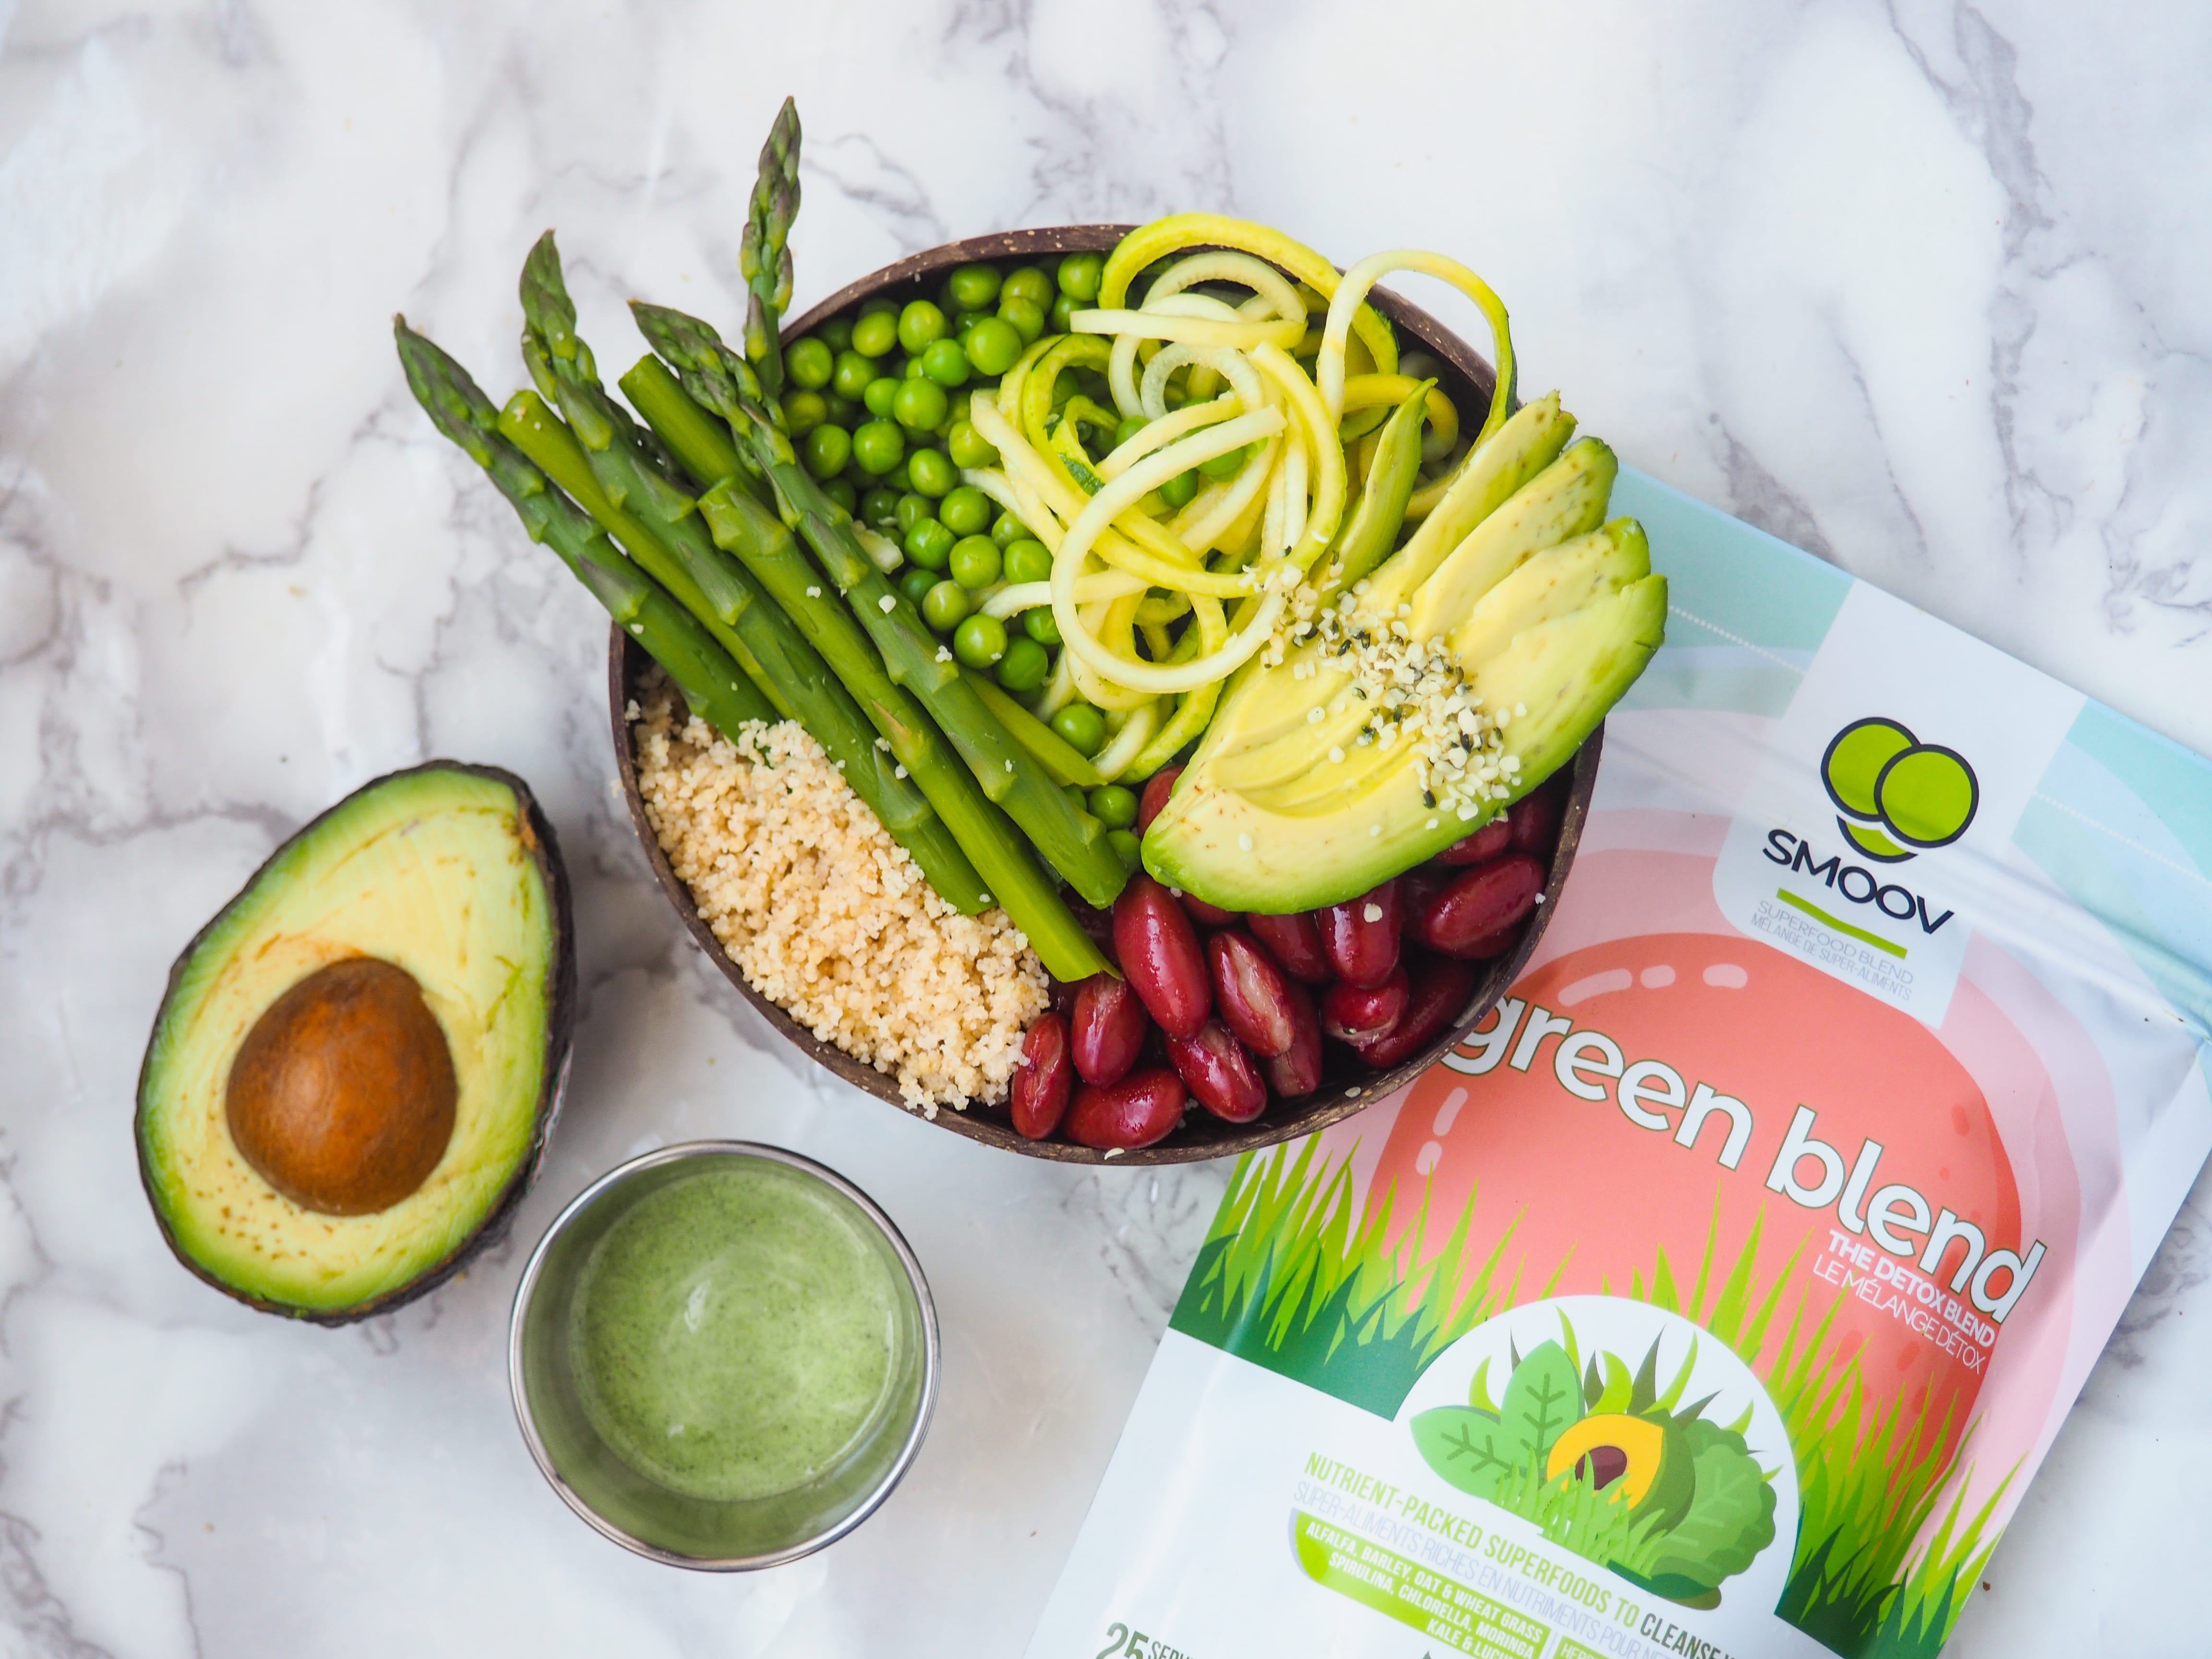 SMOOV green blend has 9 powerful superfoods with no added sugar, caffeine or additives. The easiest all-natural way to get your greens and nutrition